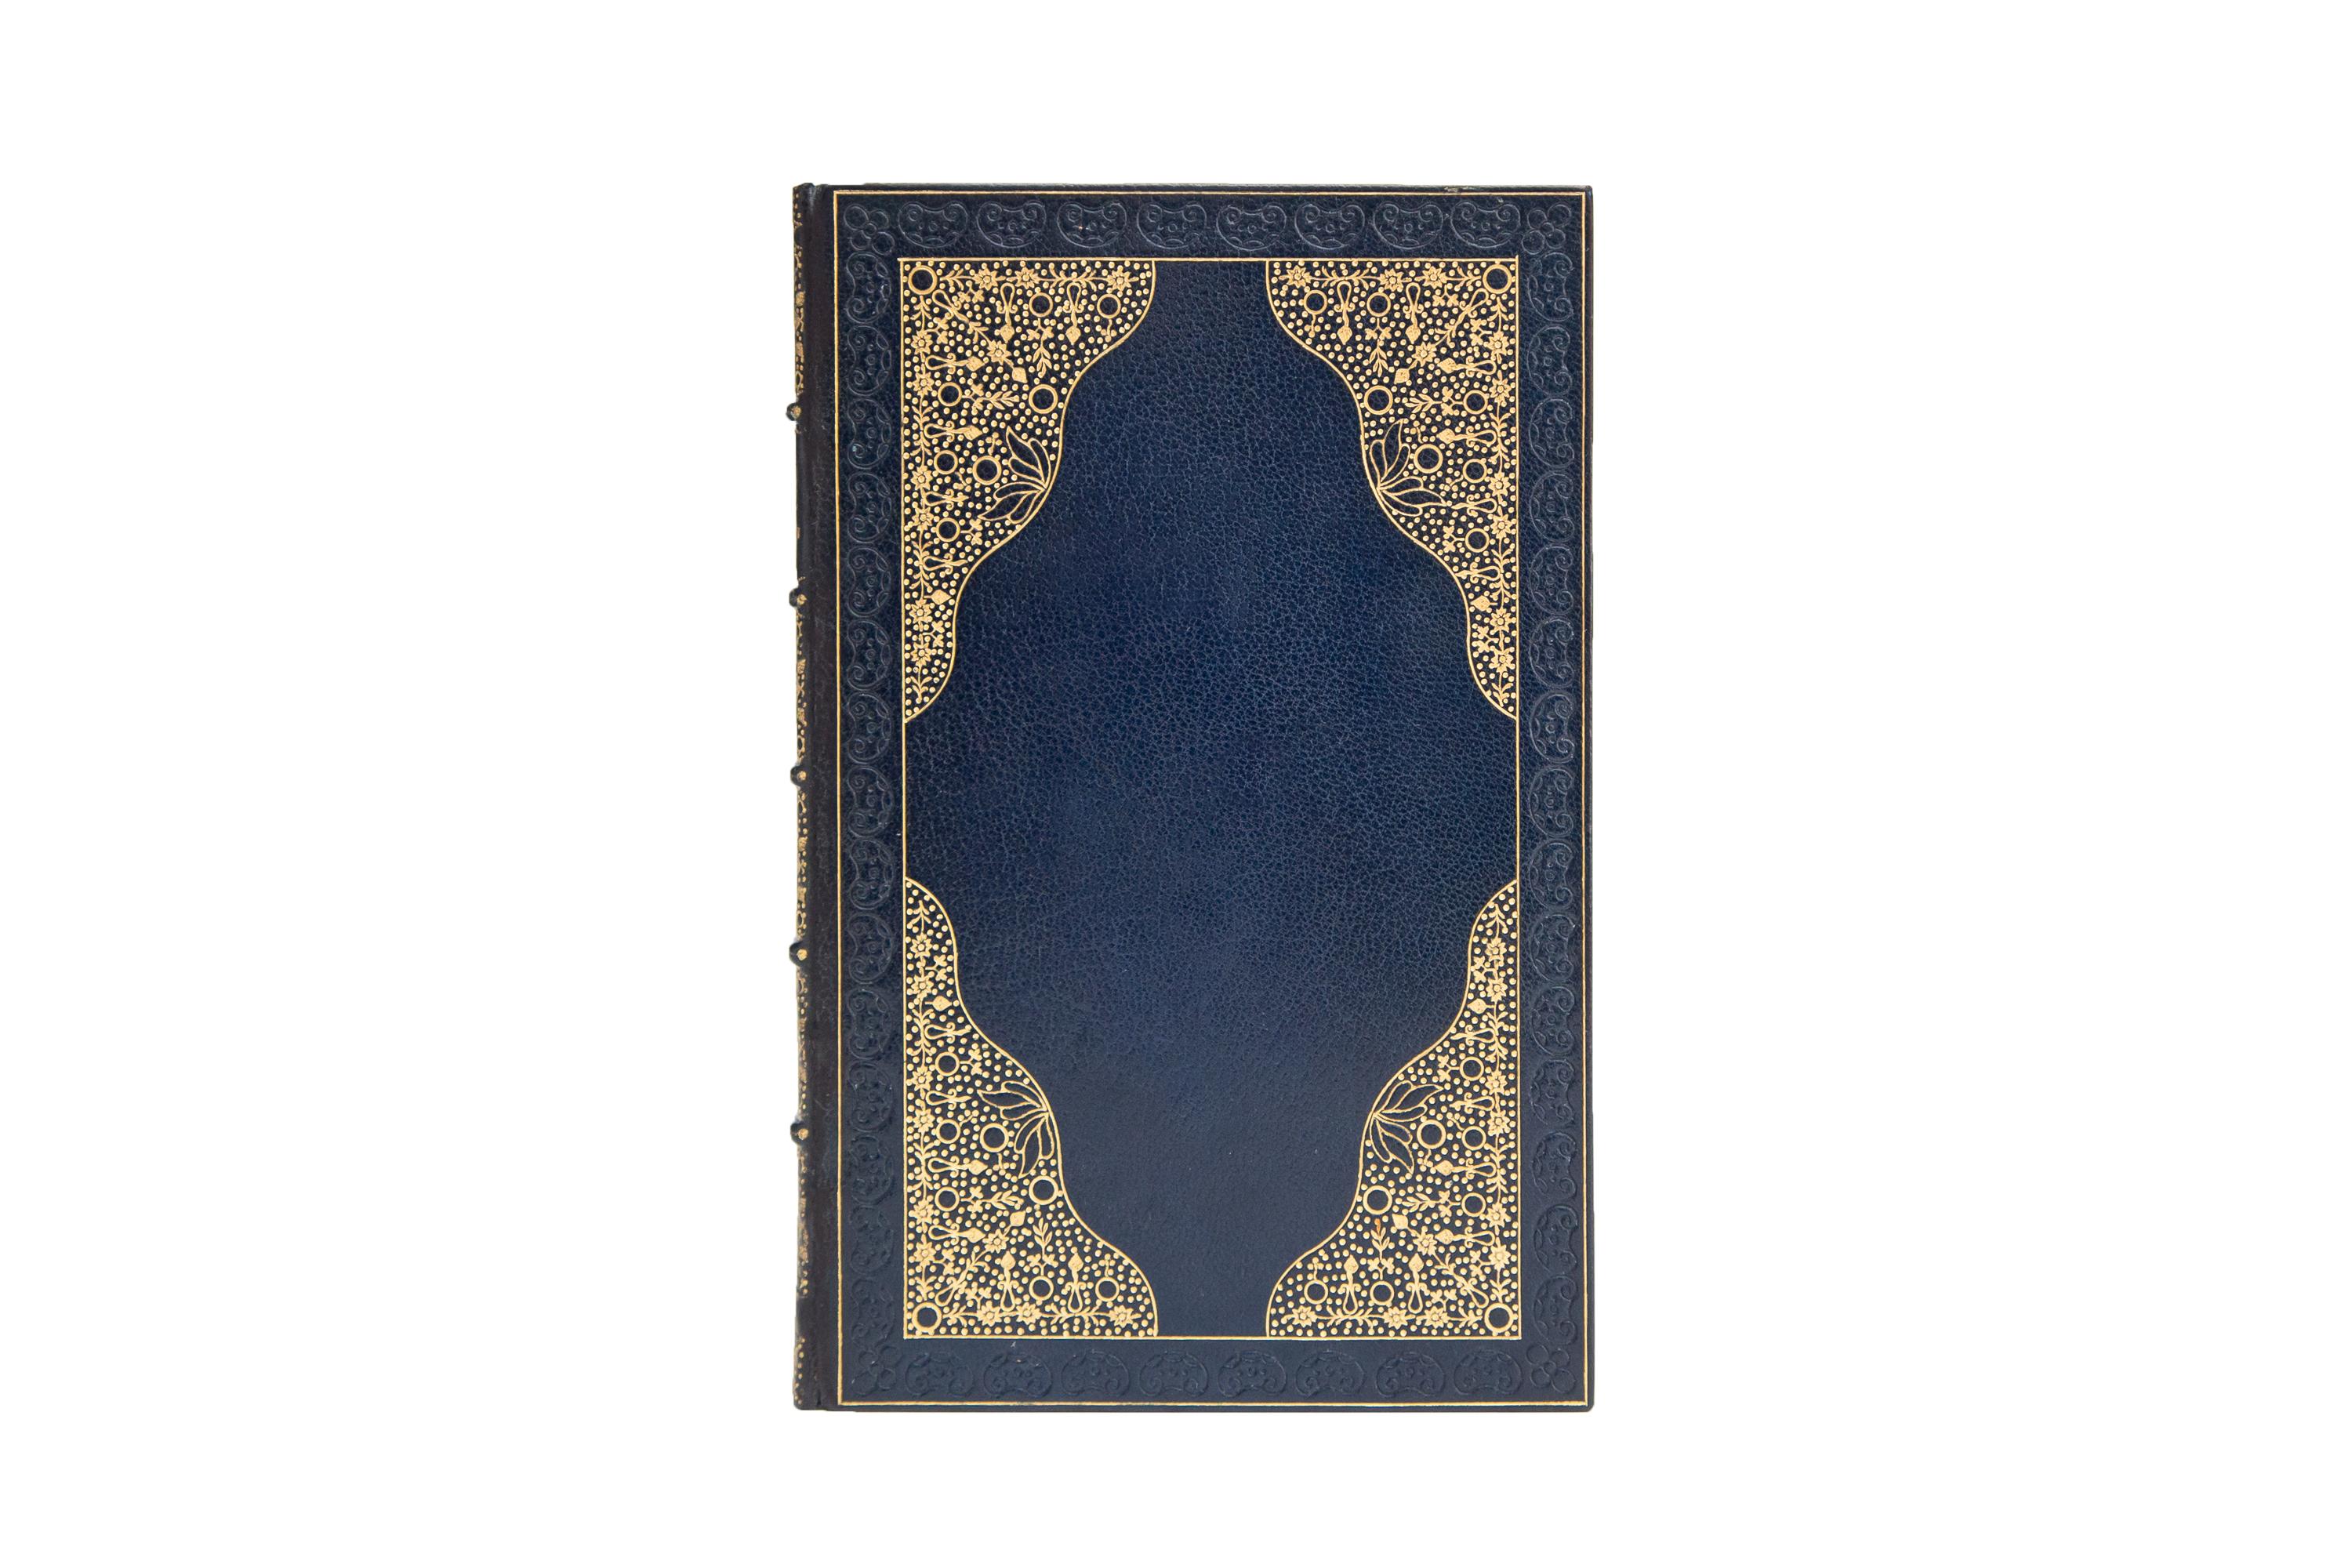 1 Volume. A.H. Bullen, Lyrics from the Dramatists of the Elizabethan Age. Bound in full blue morocco with covers displaying ornate gilt and open tooling. Raised bands, gilt with panels displaying ornate gilt detailing and label lettering in gilt,